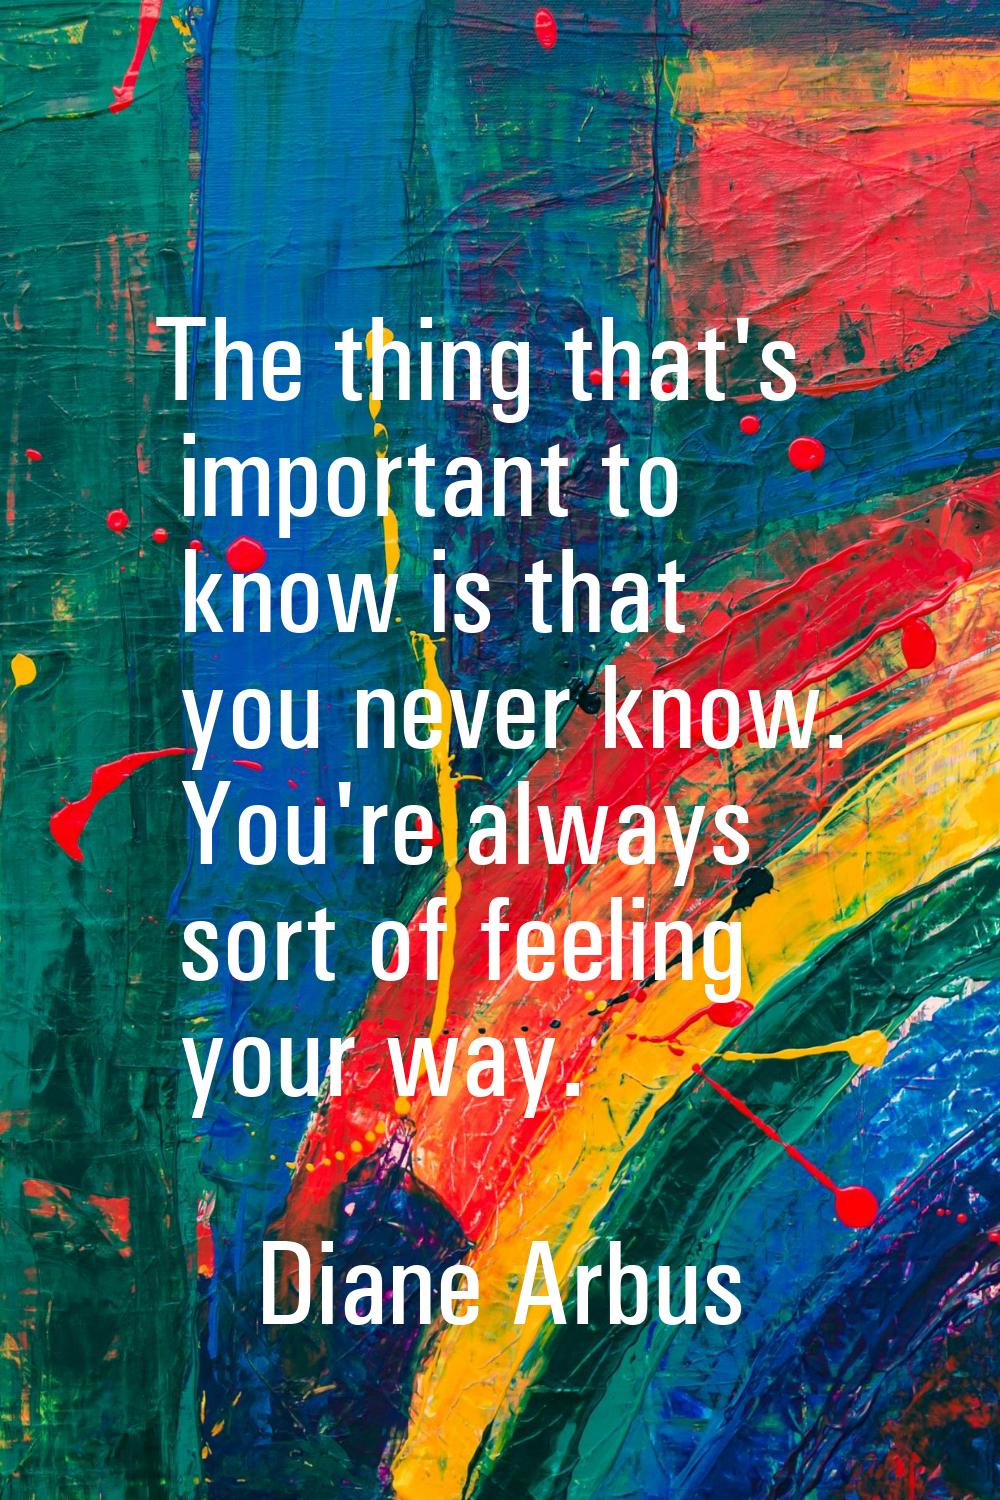 The thing that's important to know is that you never know. You're always sort of feeling your way.